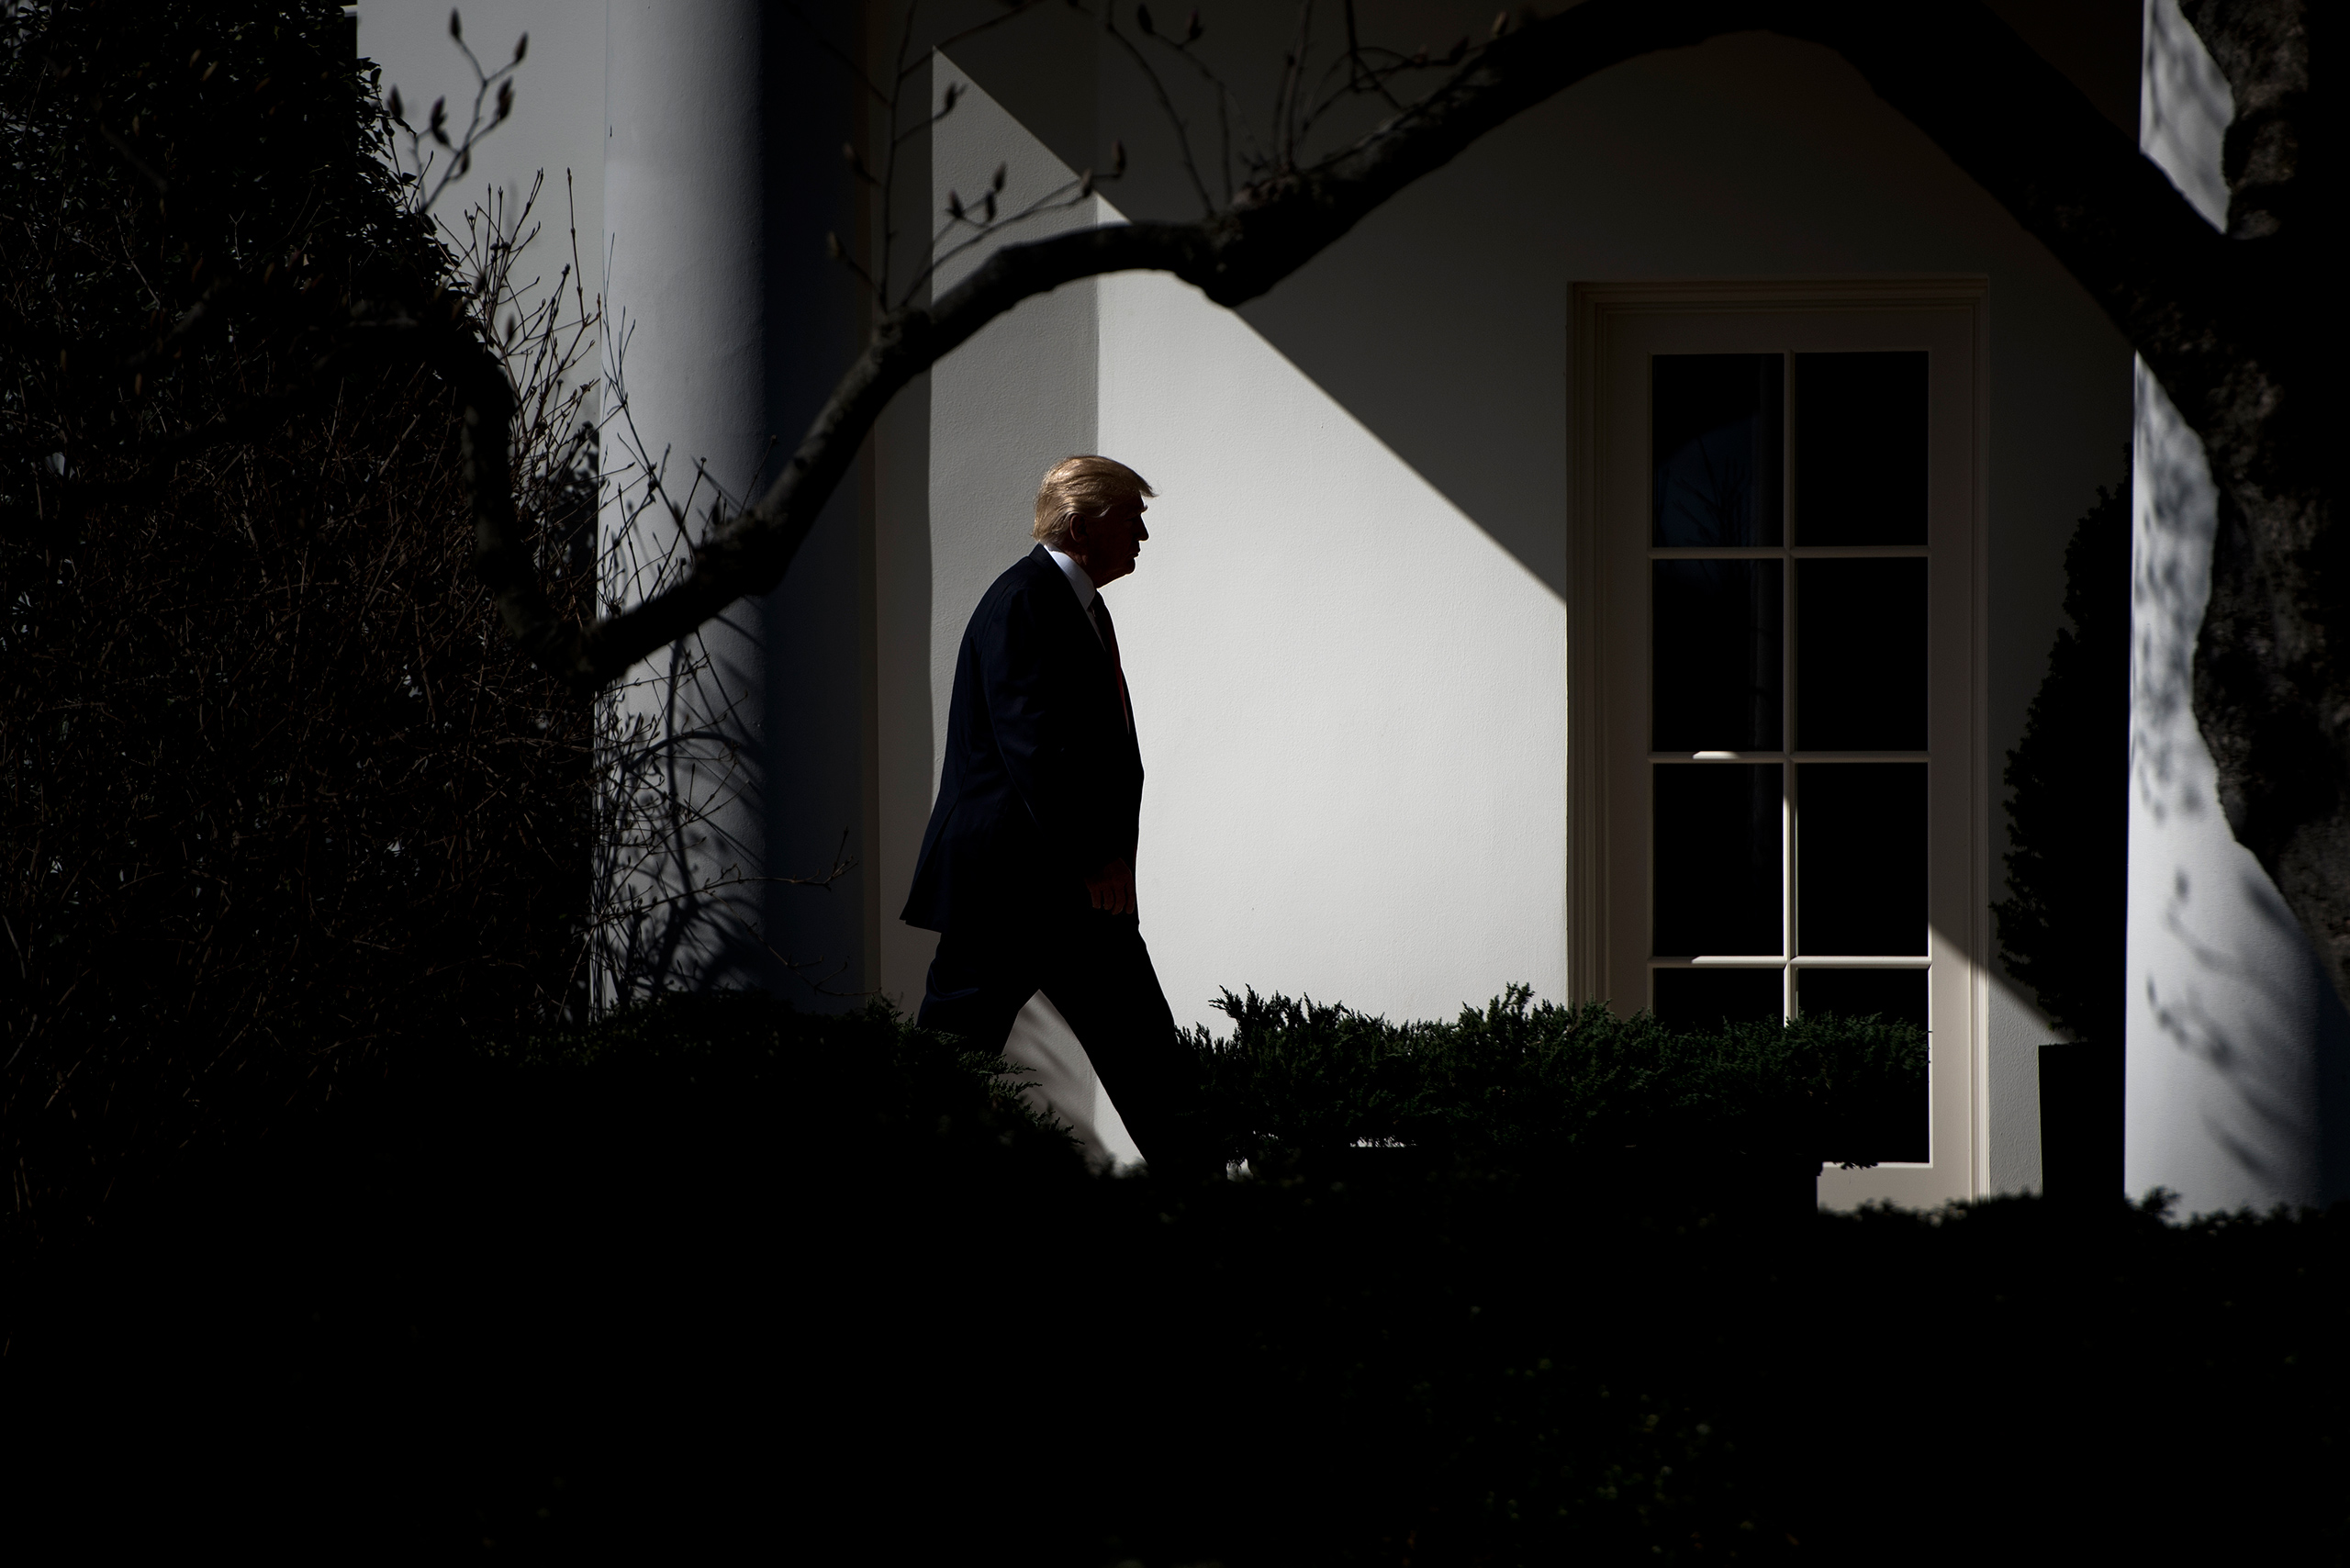 US President Donald Trump walks from Marine One to the White House February 24, 2017 in Washington, DC. (Brendan Smialowski—AFP/Getty Images)